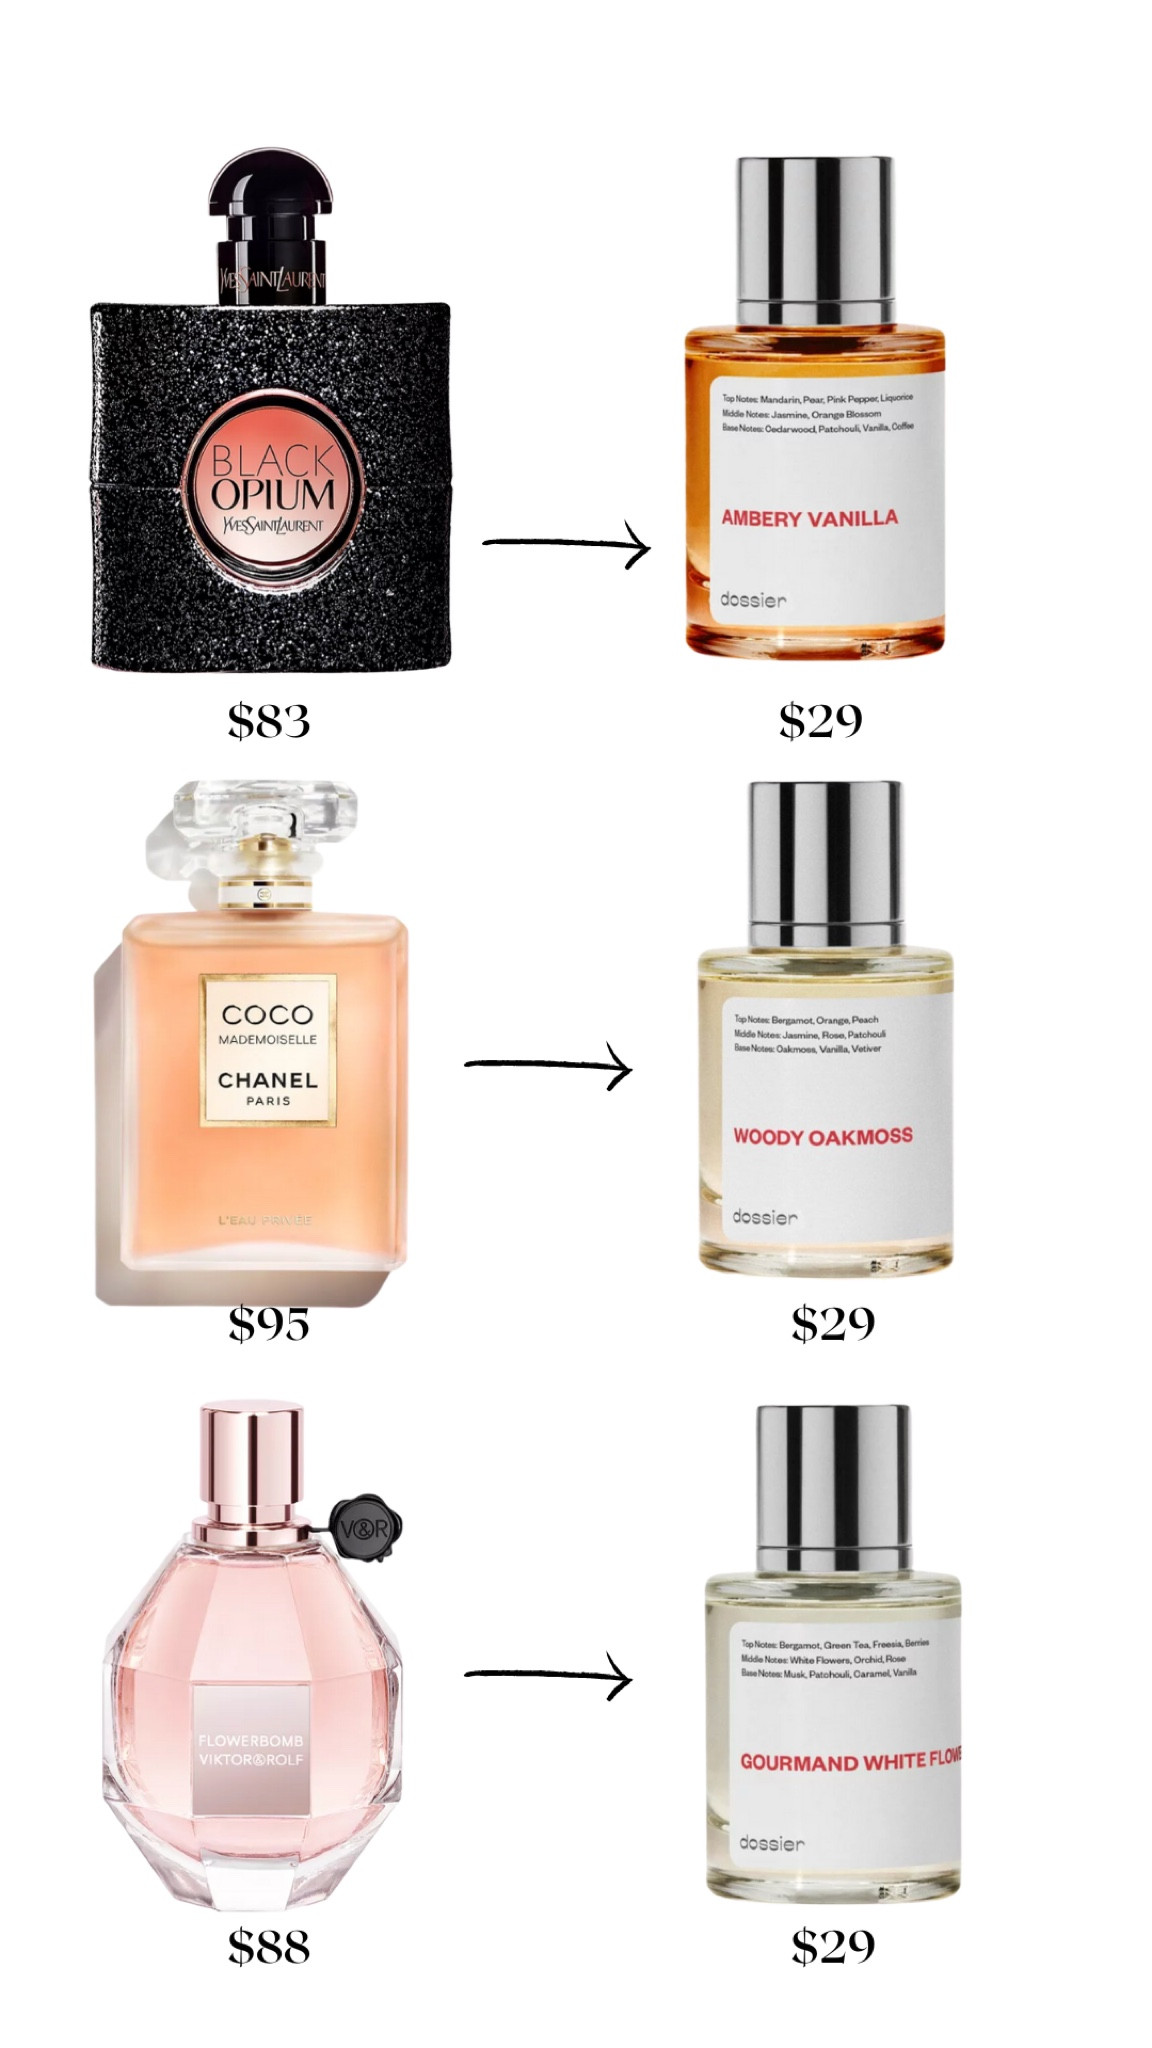 Coco Chanel Perfume Dossier.co and Its Best Fragrances - Blog Halt